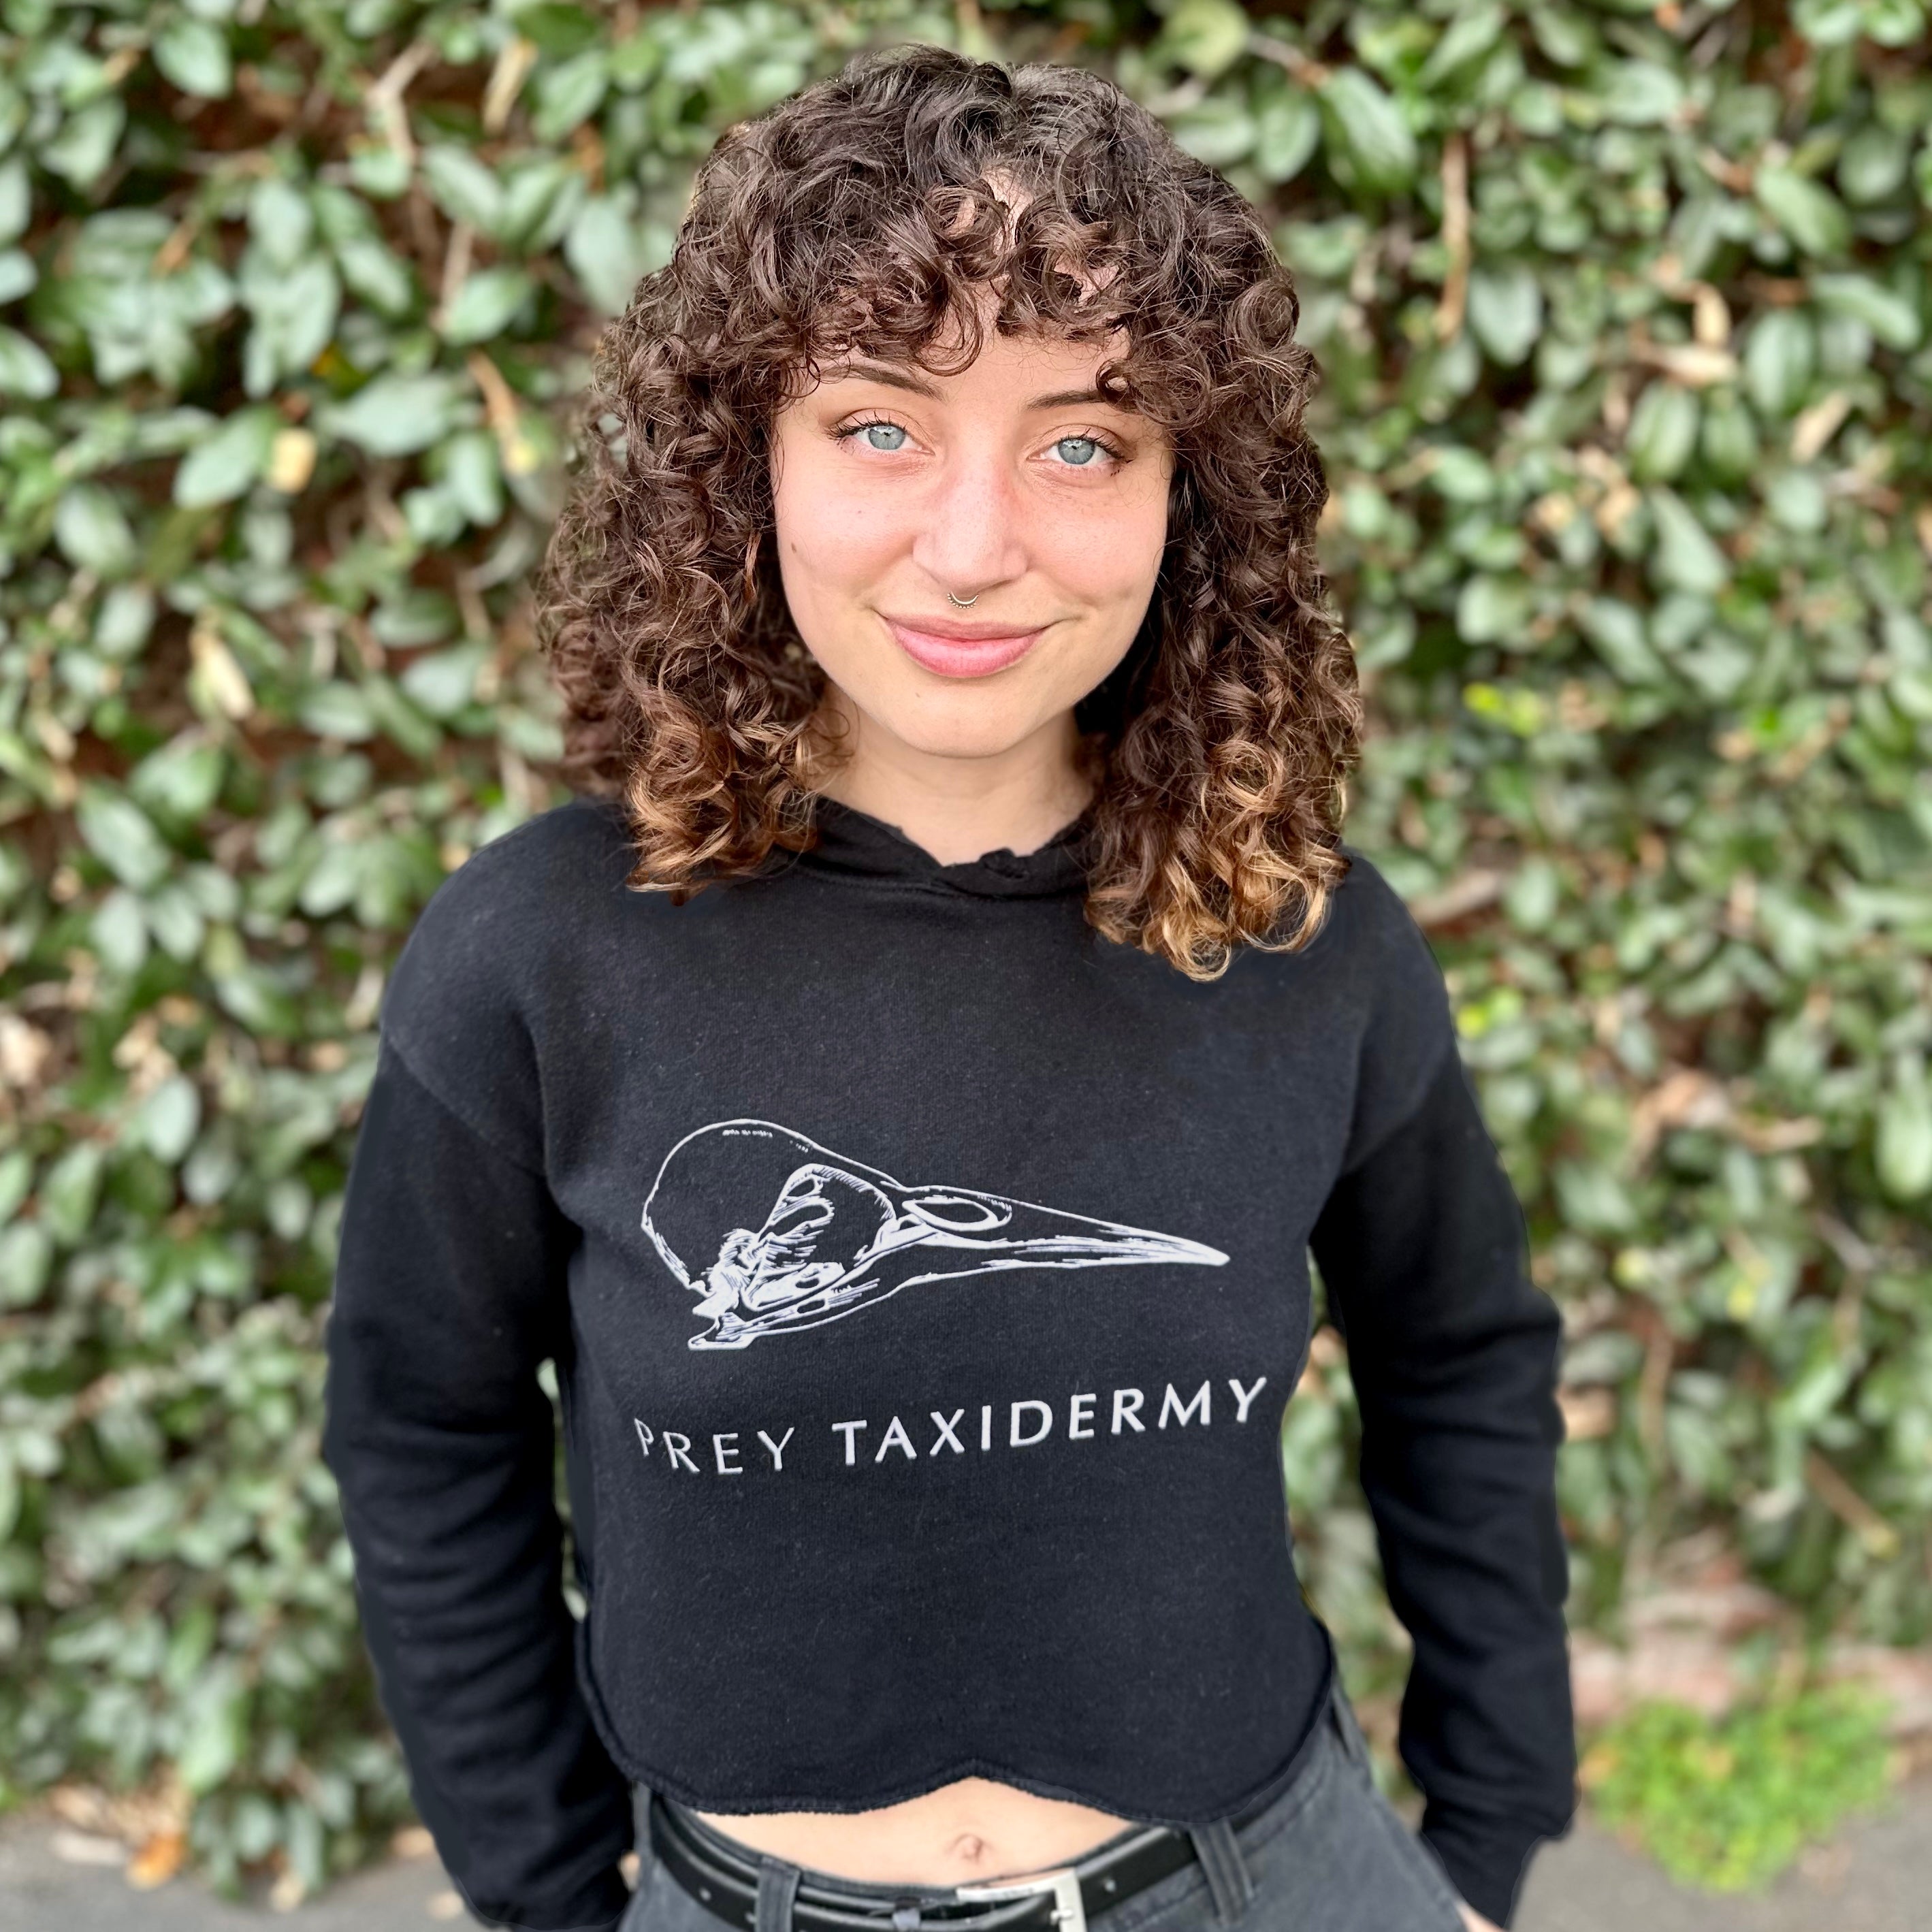 Paloma Strong, Studio Manager at Prey Taxidermy, wearing the black cropped hoodie. Black Crop Hoodie | Black Cropped Hoodie | Prey Taxidermy Hoodie | Prey Taxidermy Logo in White with Bird Skull